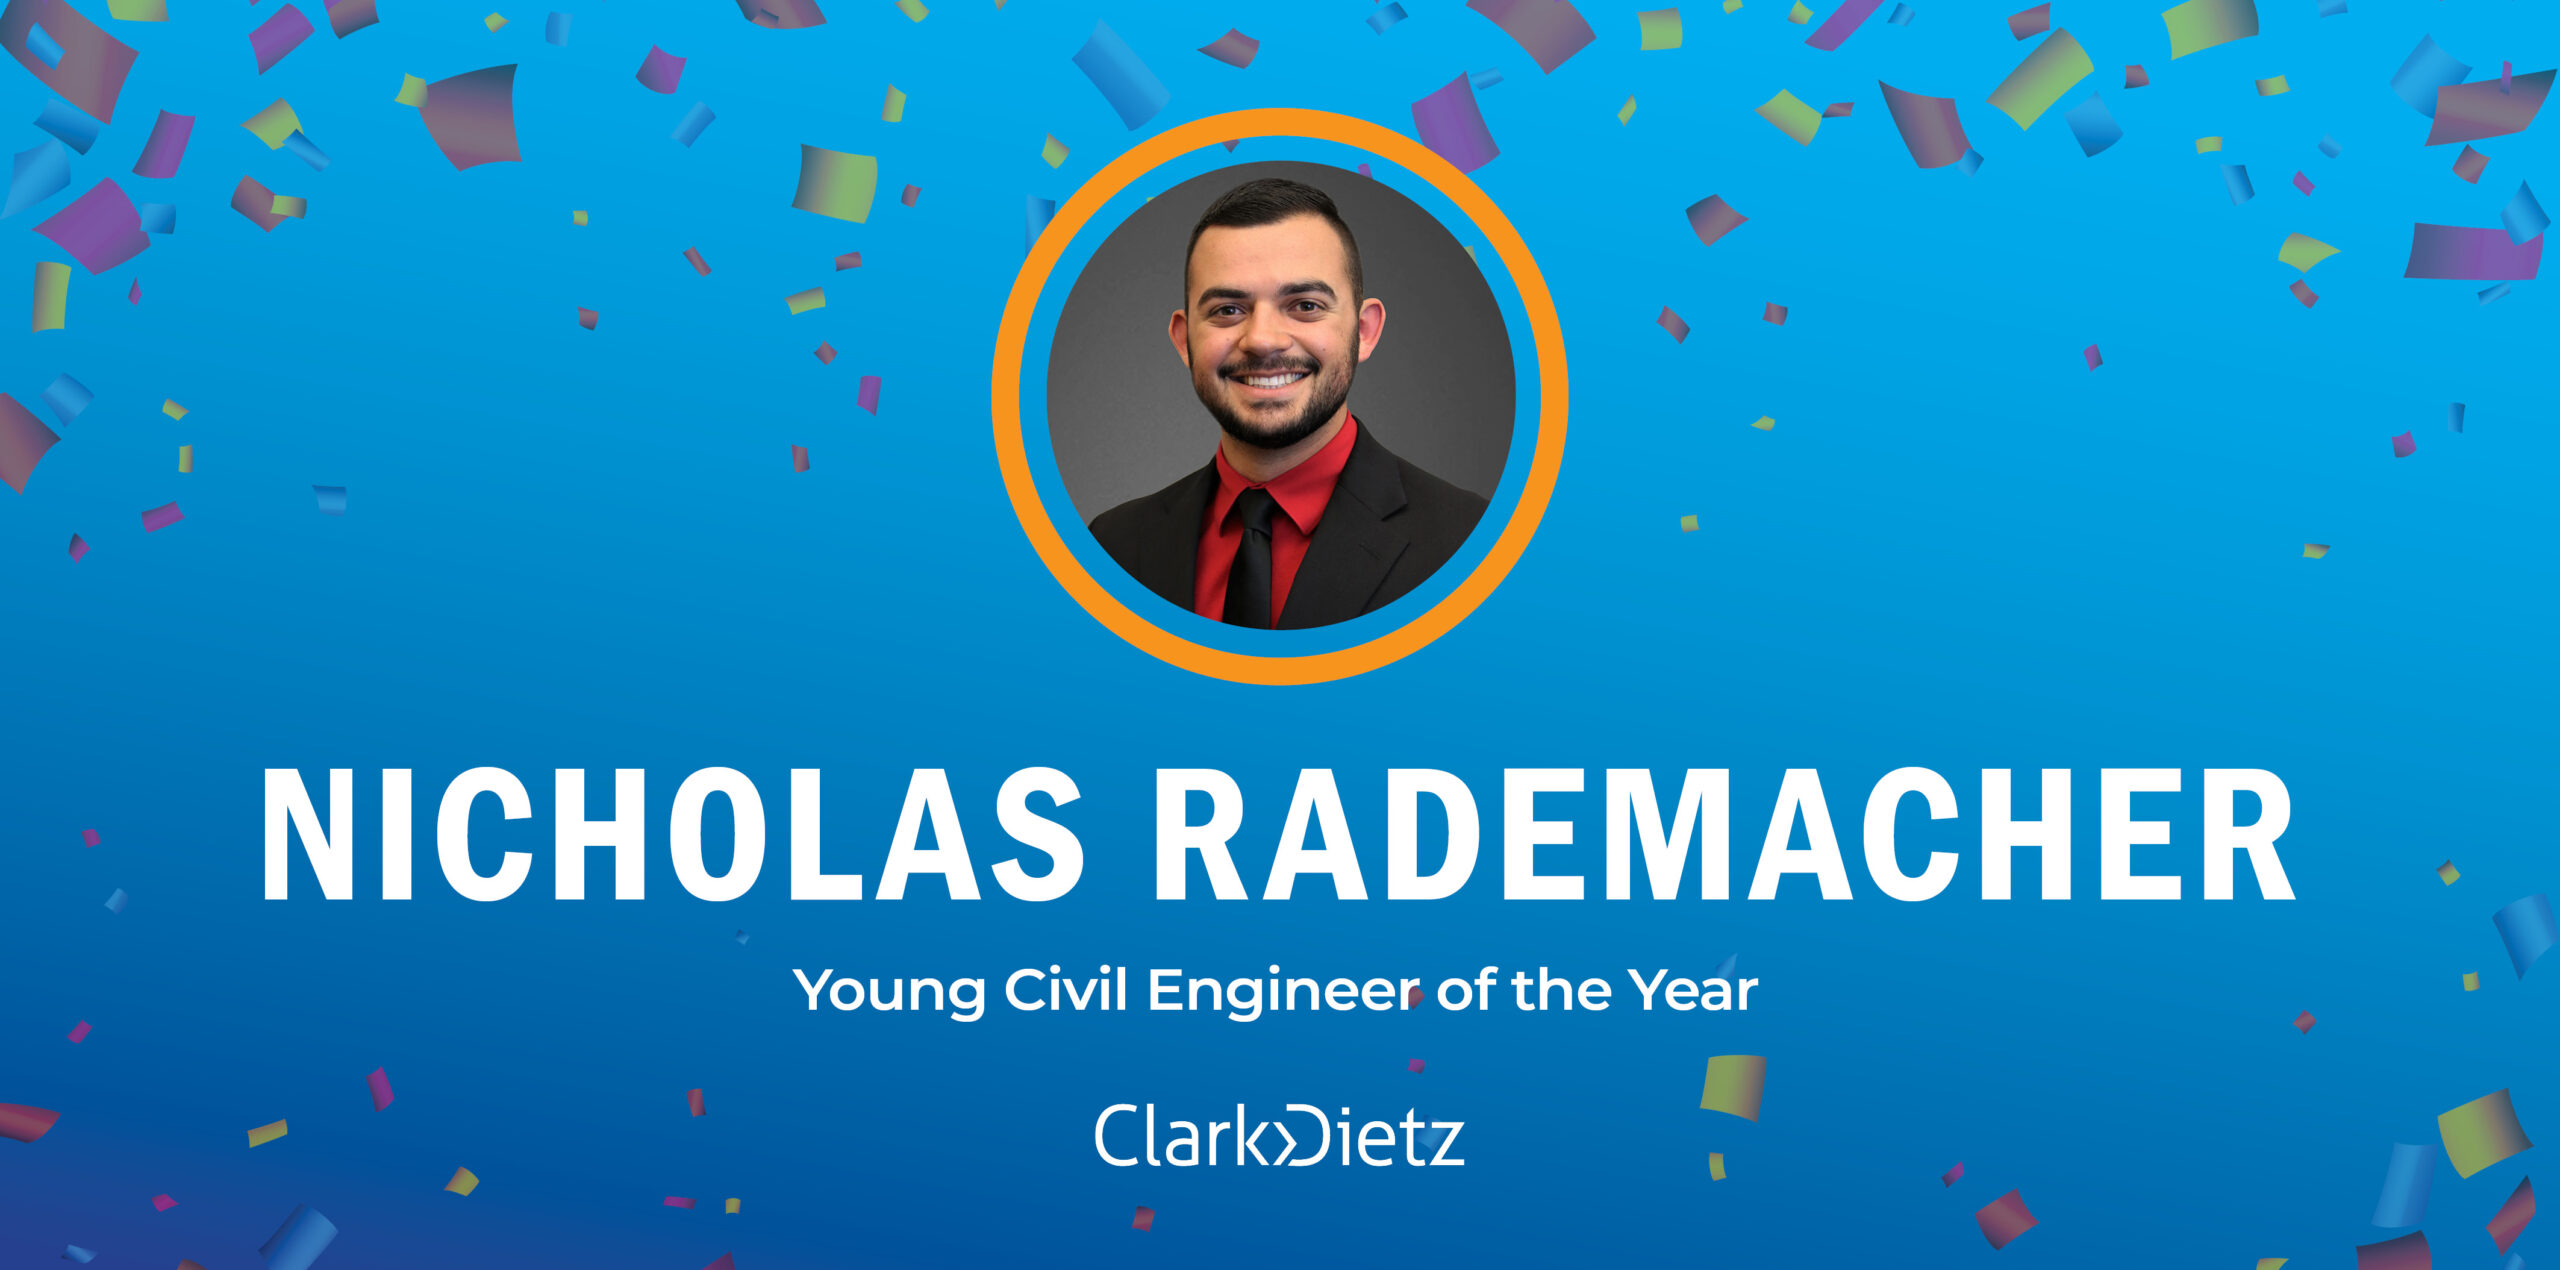 headshot of nicholas rademacher and the words "young civil engineer of the year"